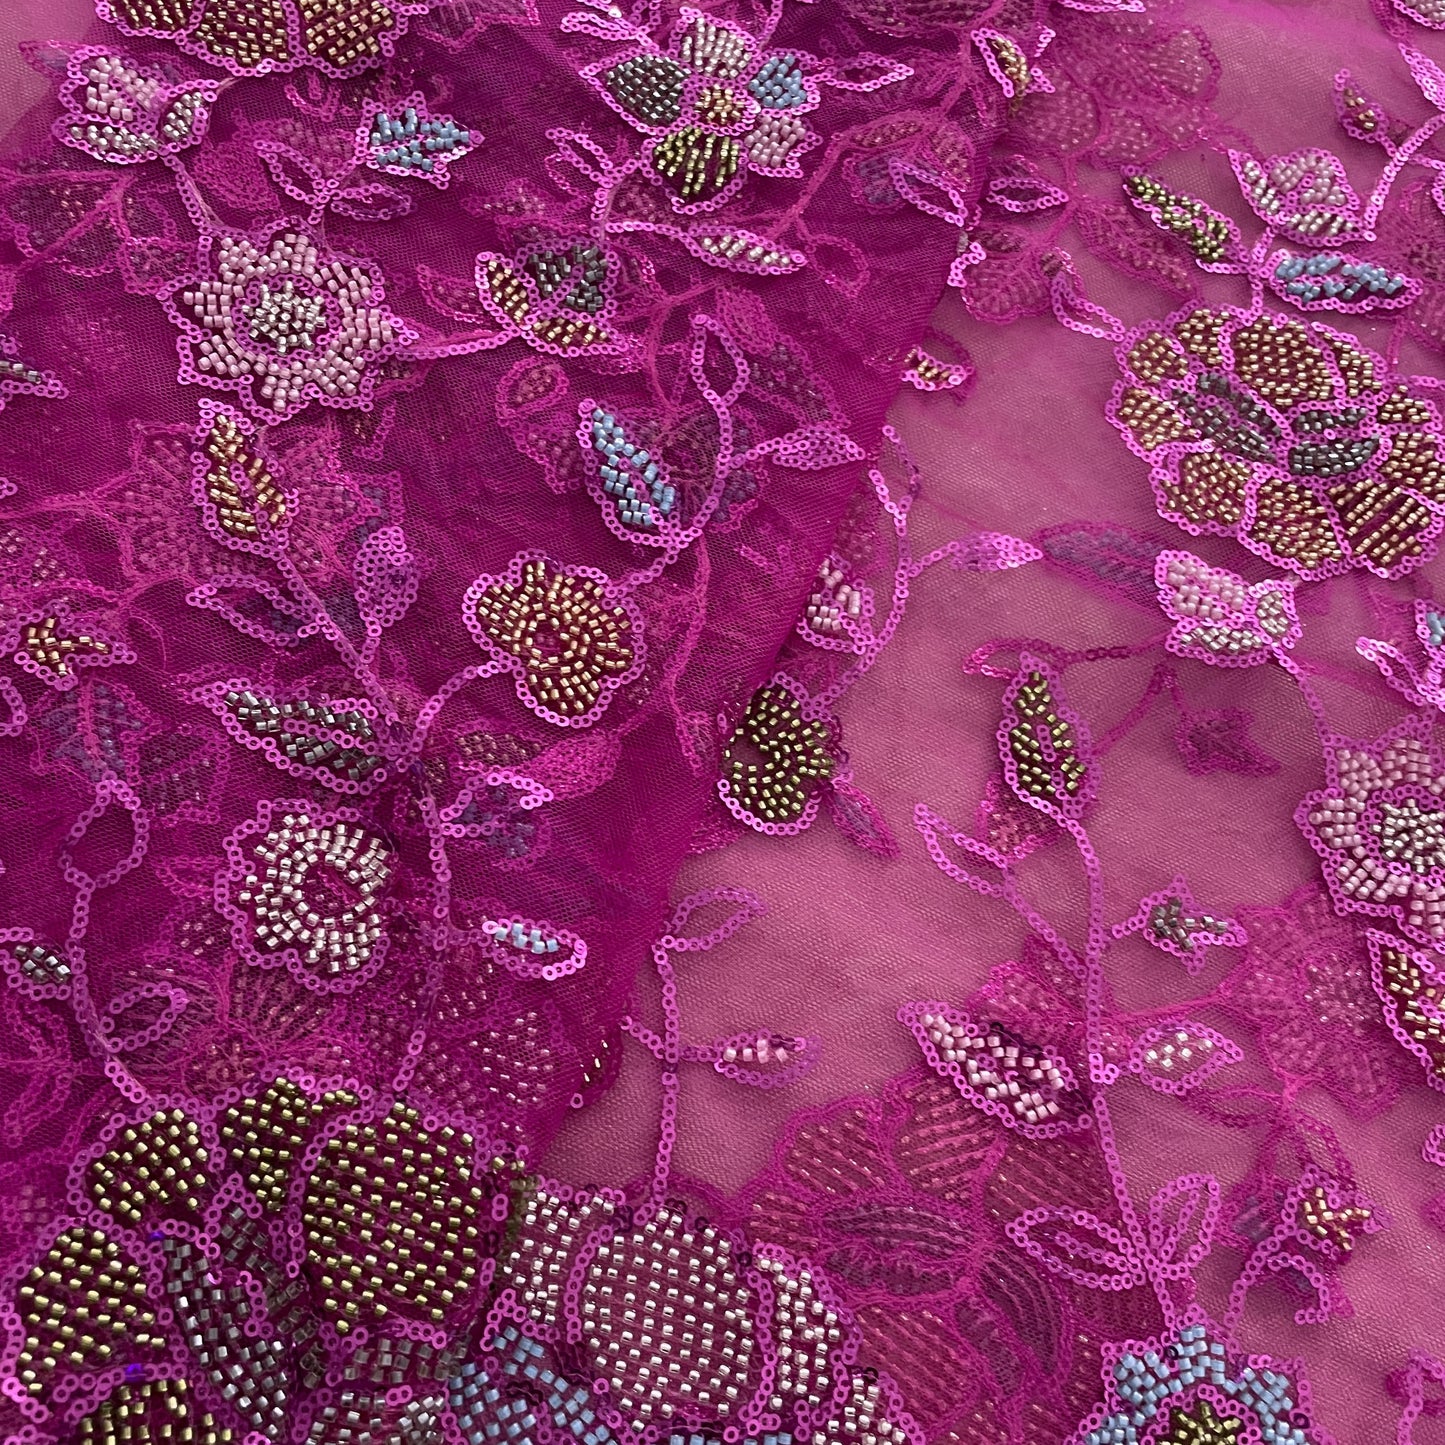 Premium Pink Floral CutDana Sequins Embroidery Net Fabric